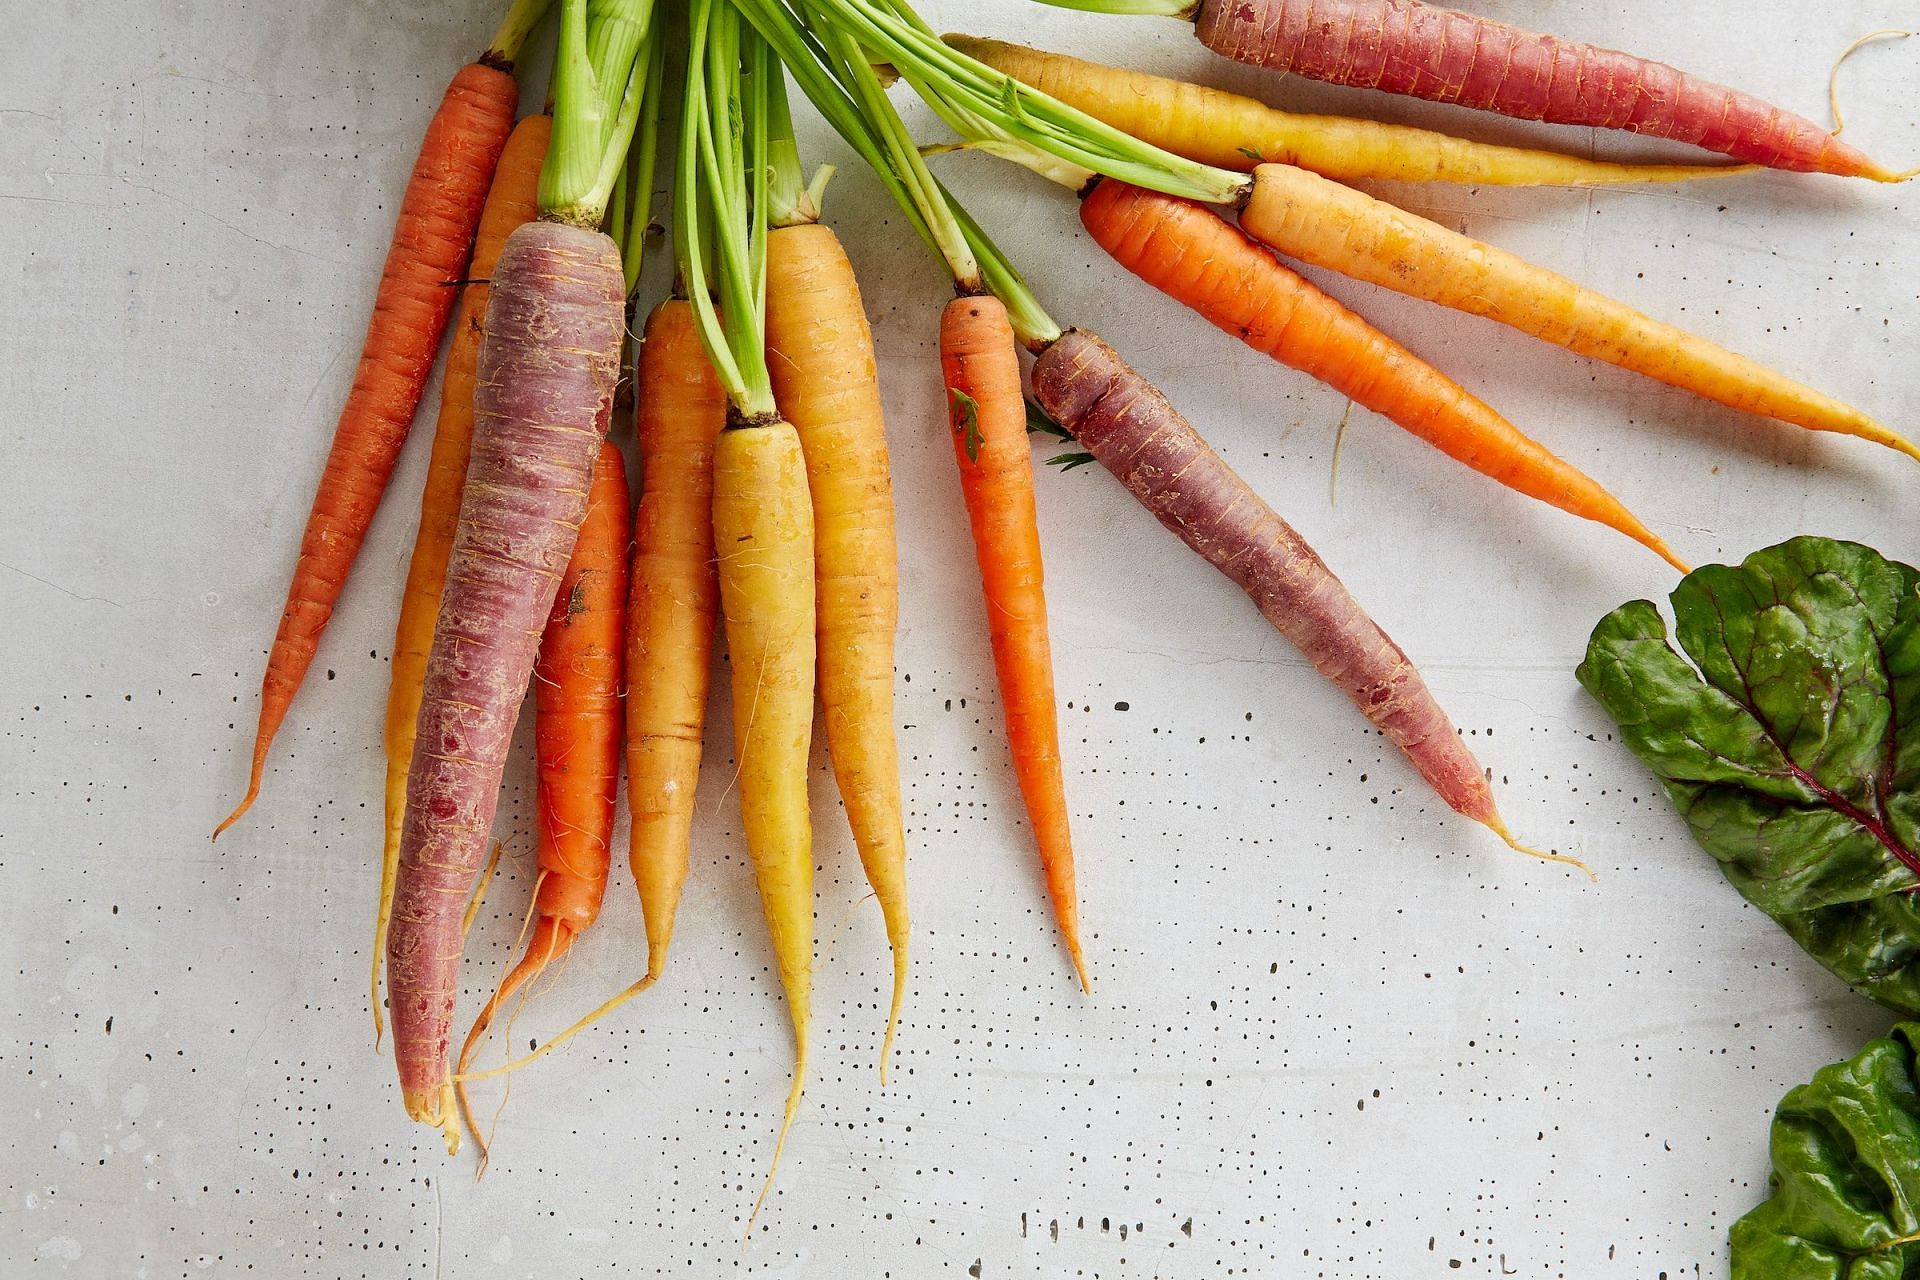 Carrots are also an excellent source of plant-based Vitamin A (Image via Unsplash/Gabriel Gurrola)